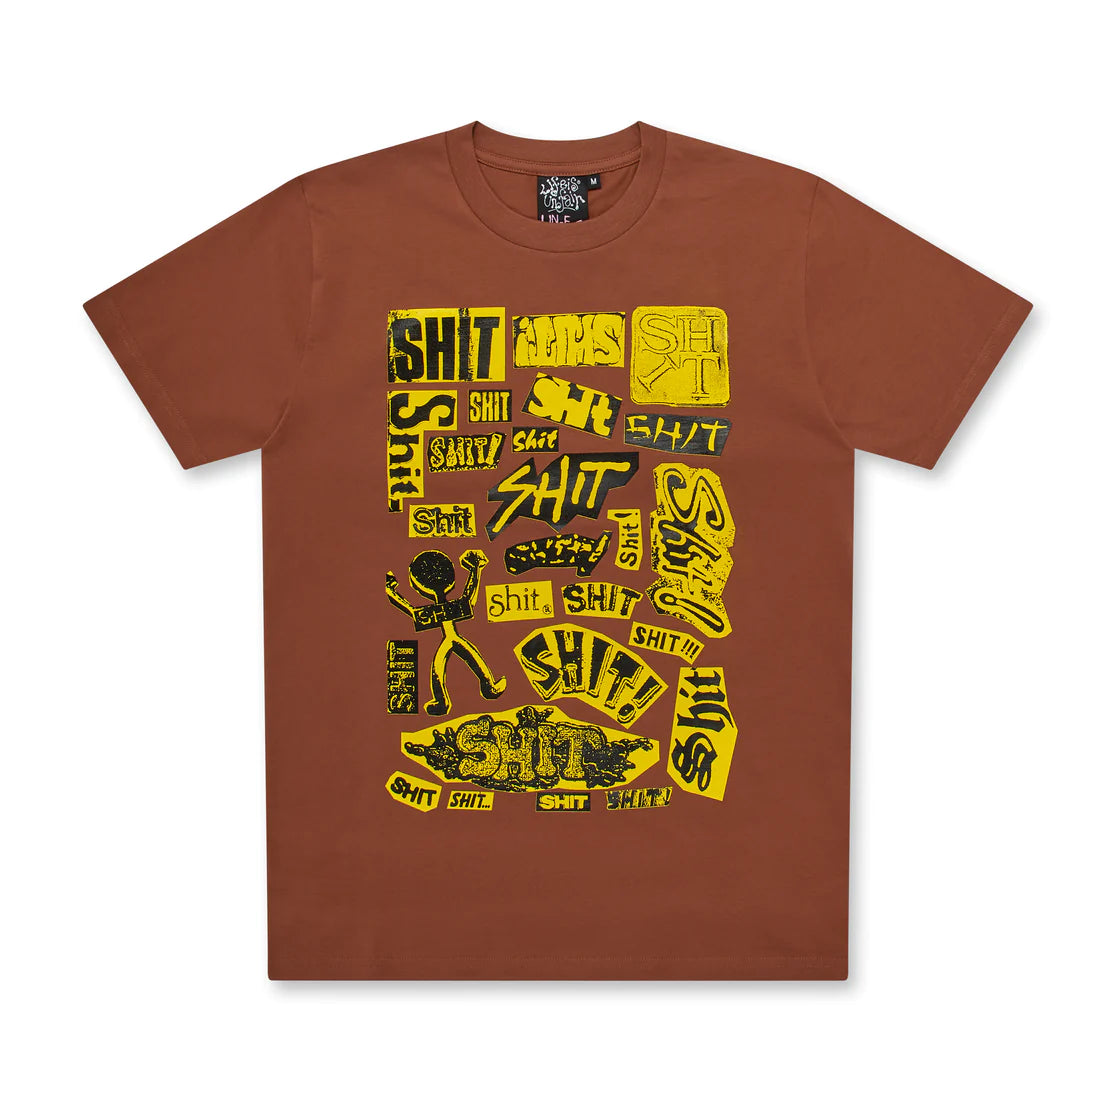 LIFE IS UNFAIR - SHIT ARCHIVE T-SHIRT - (BROWN) view 1